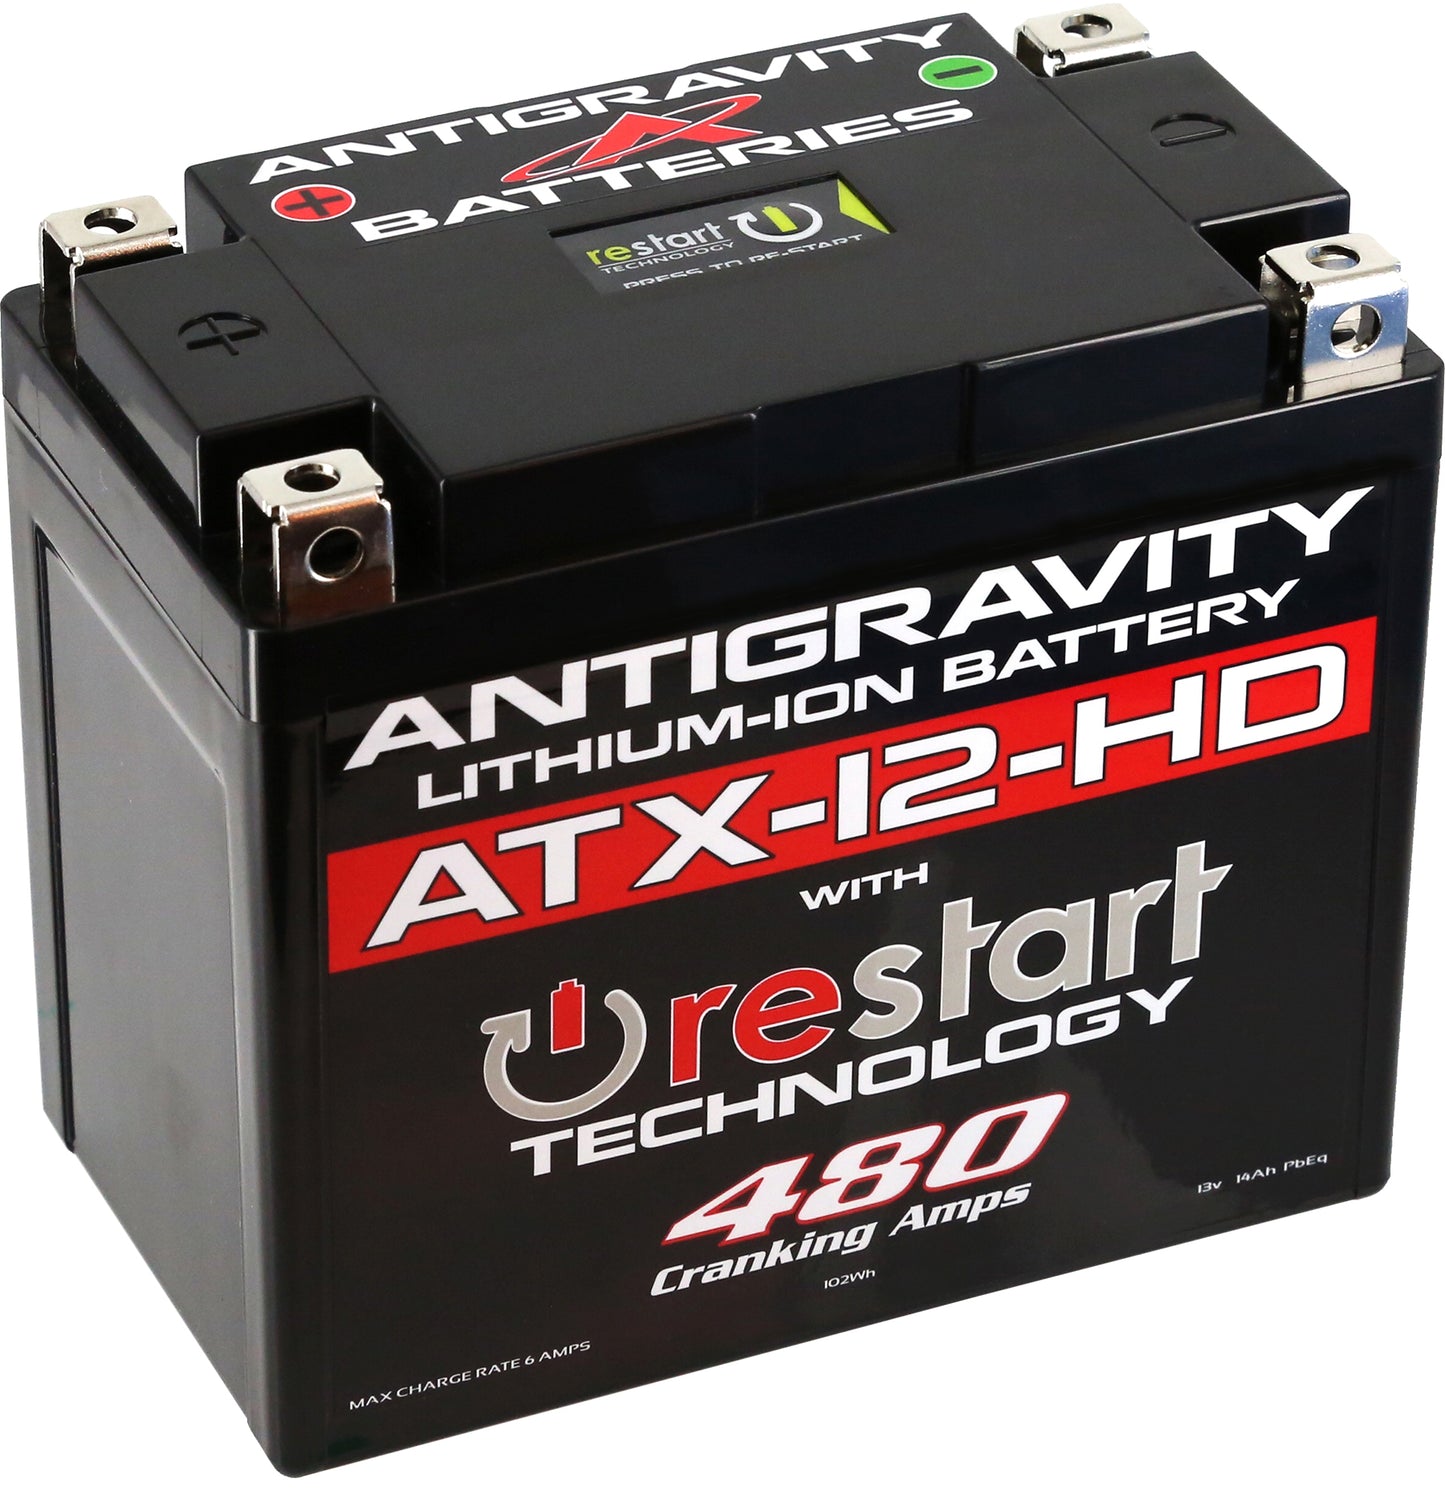 Lithium Battery ATX12-HD-RS